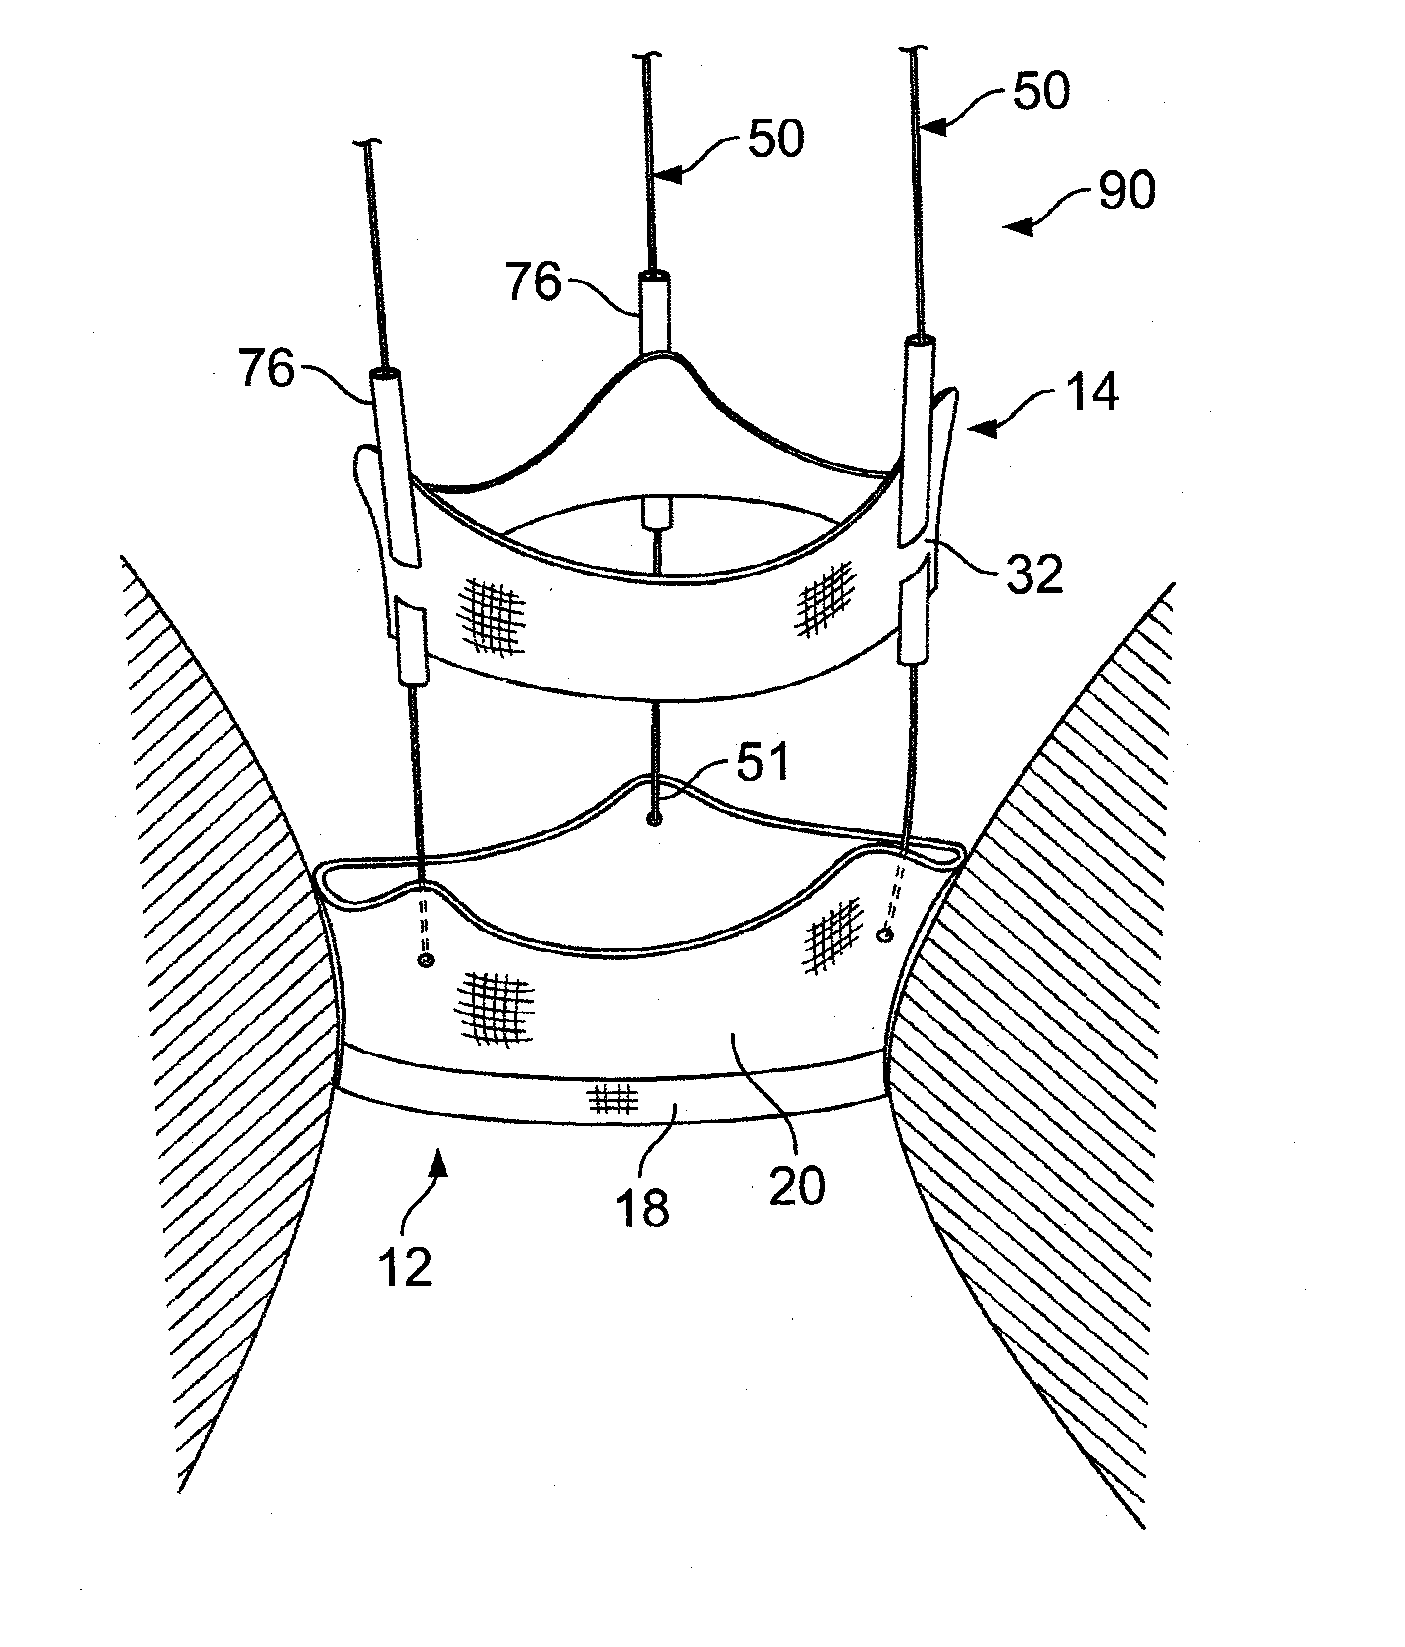 Foldable prostheses, multiple component prosthetic heart valve assemblies, and apparatus and methods for delivering them